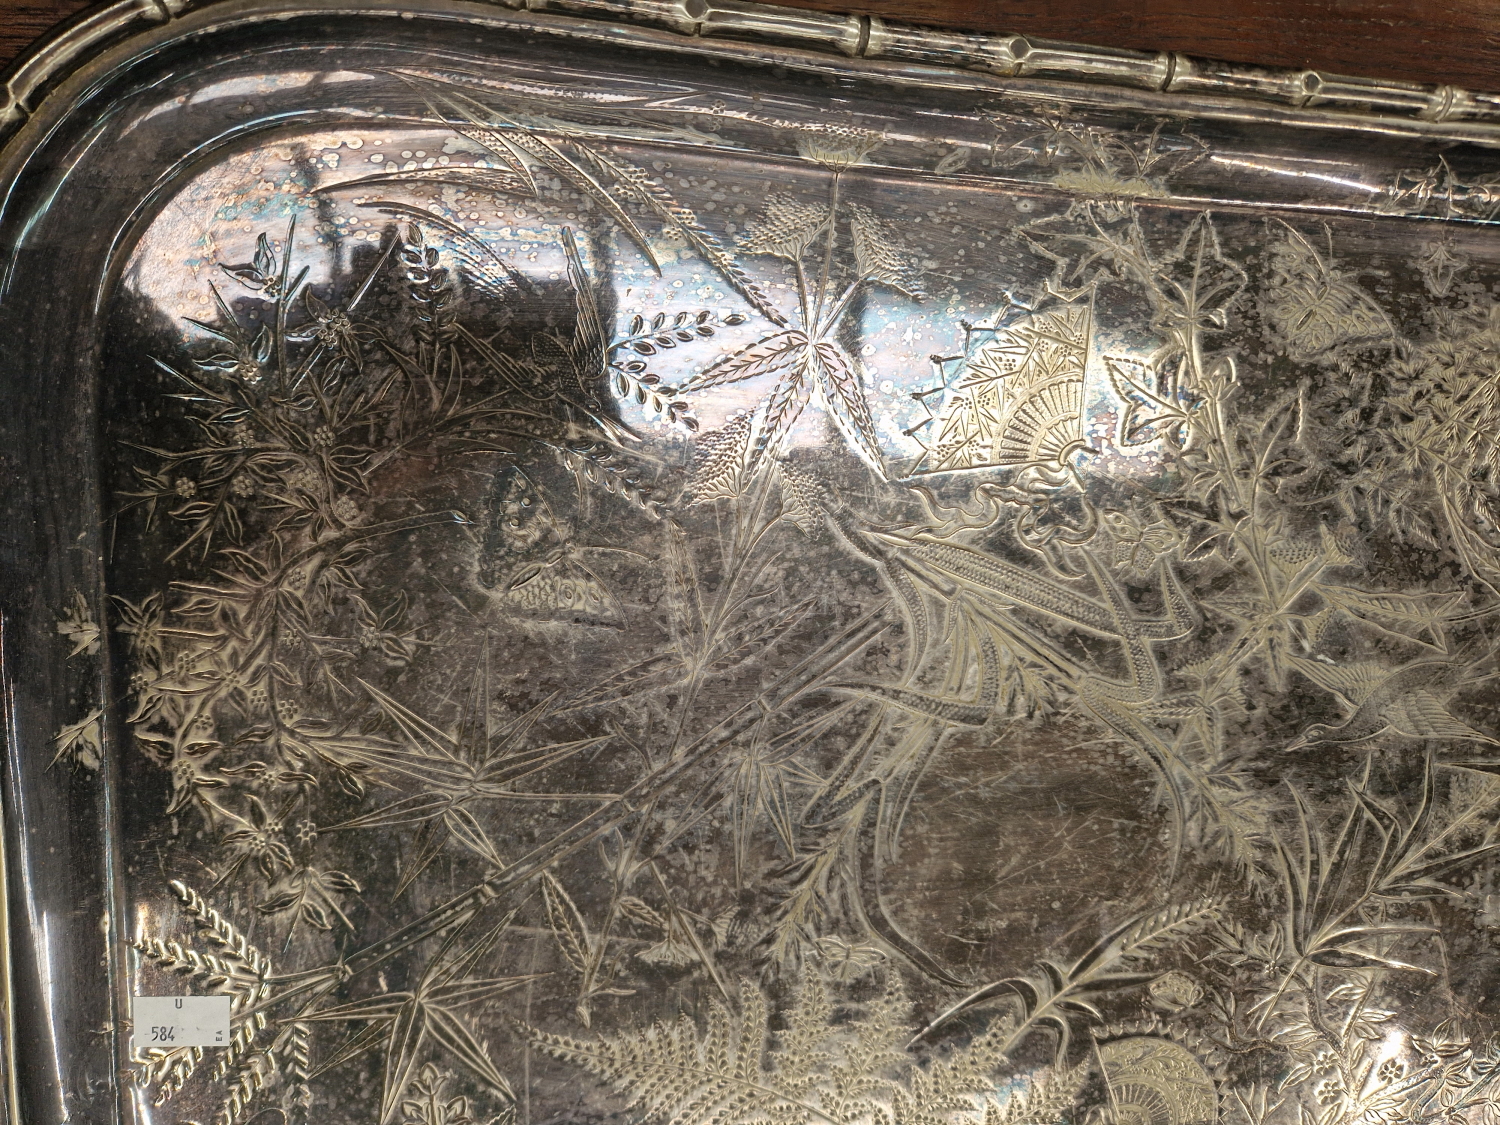 A LARGE SILVER PLATED TRAY IN THE AESTHETIC TASTE. - Image 4 of 6